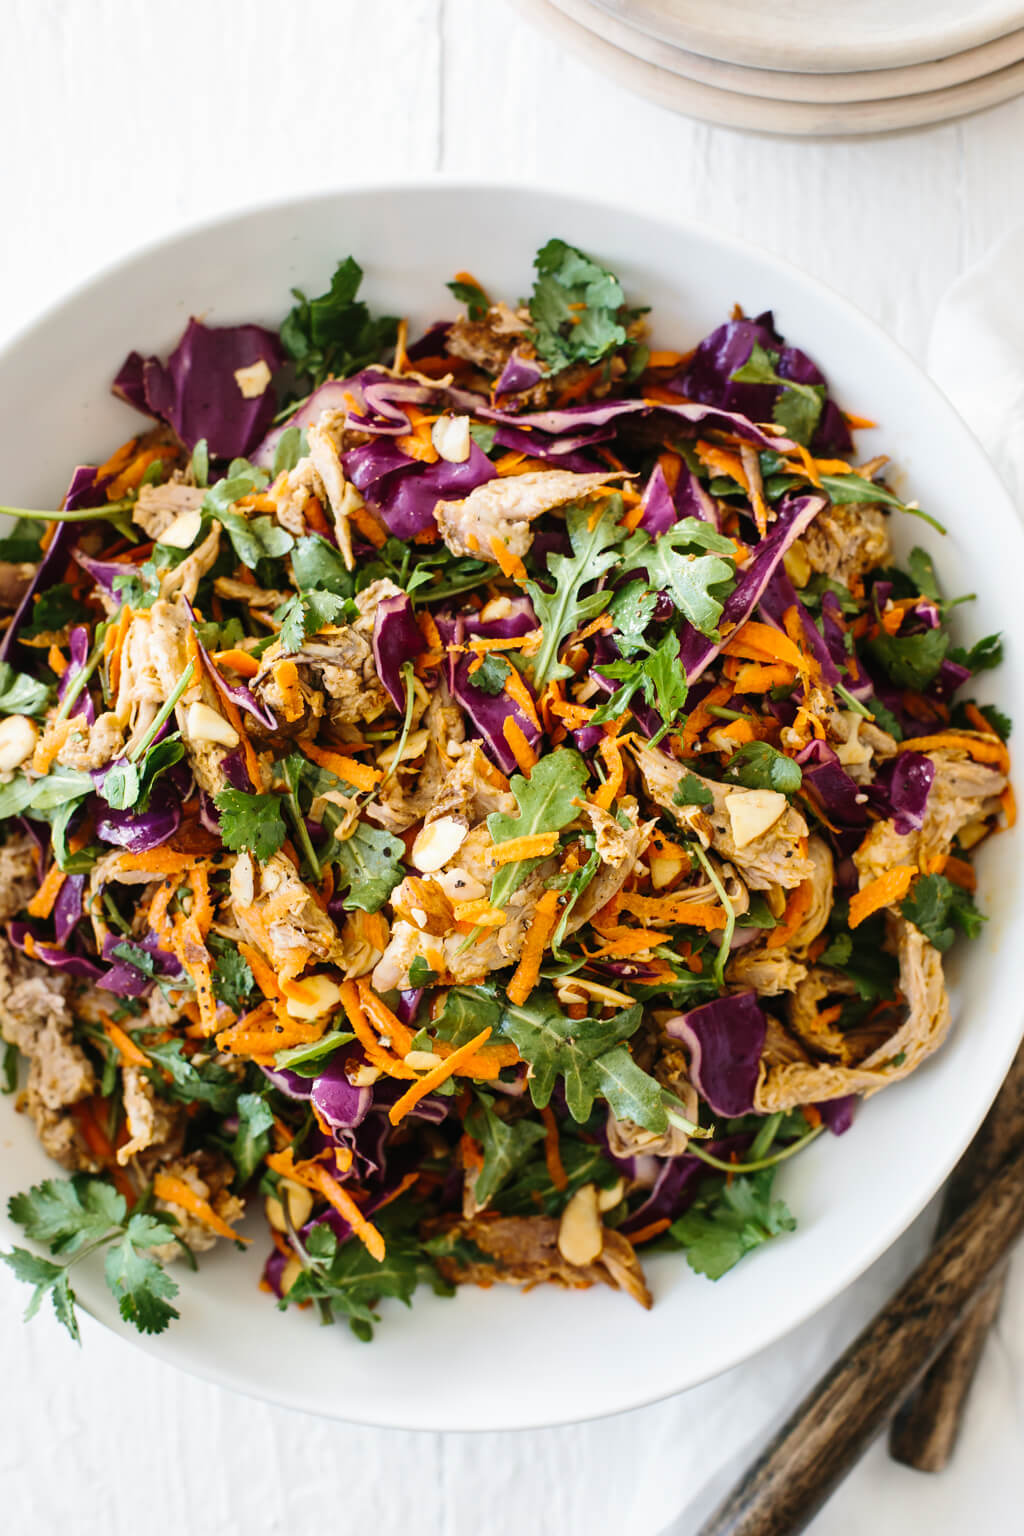 Pulled pork, cabbage and arugula salad with citrus lime vinaigrette. A hearty, flavorful and healthy salad recipe.